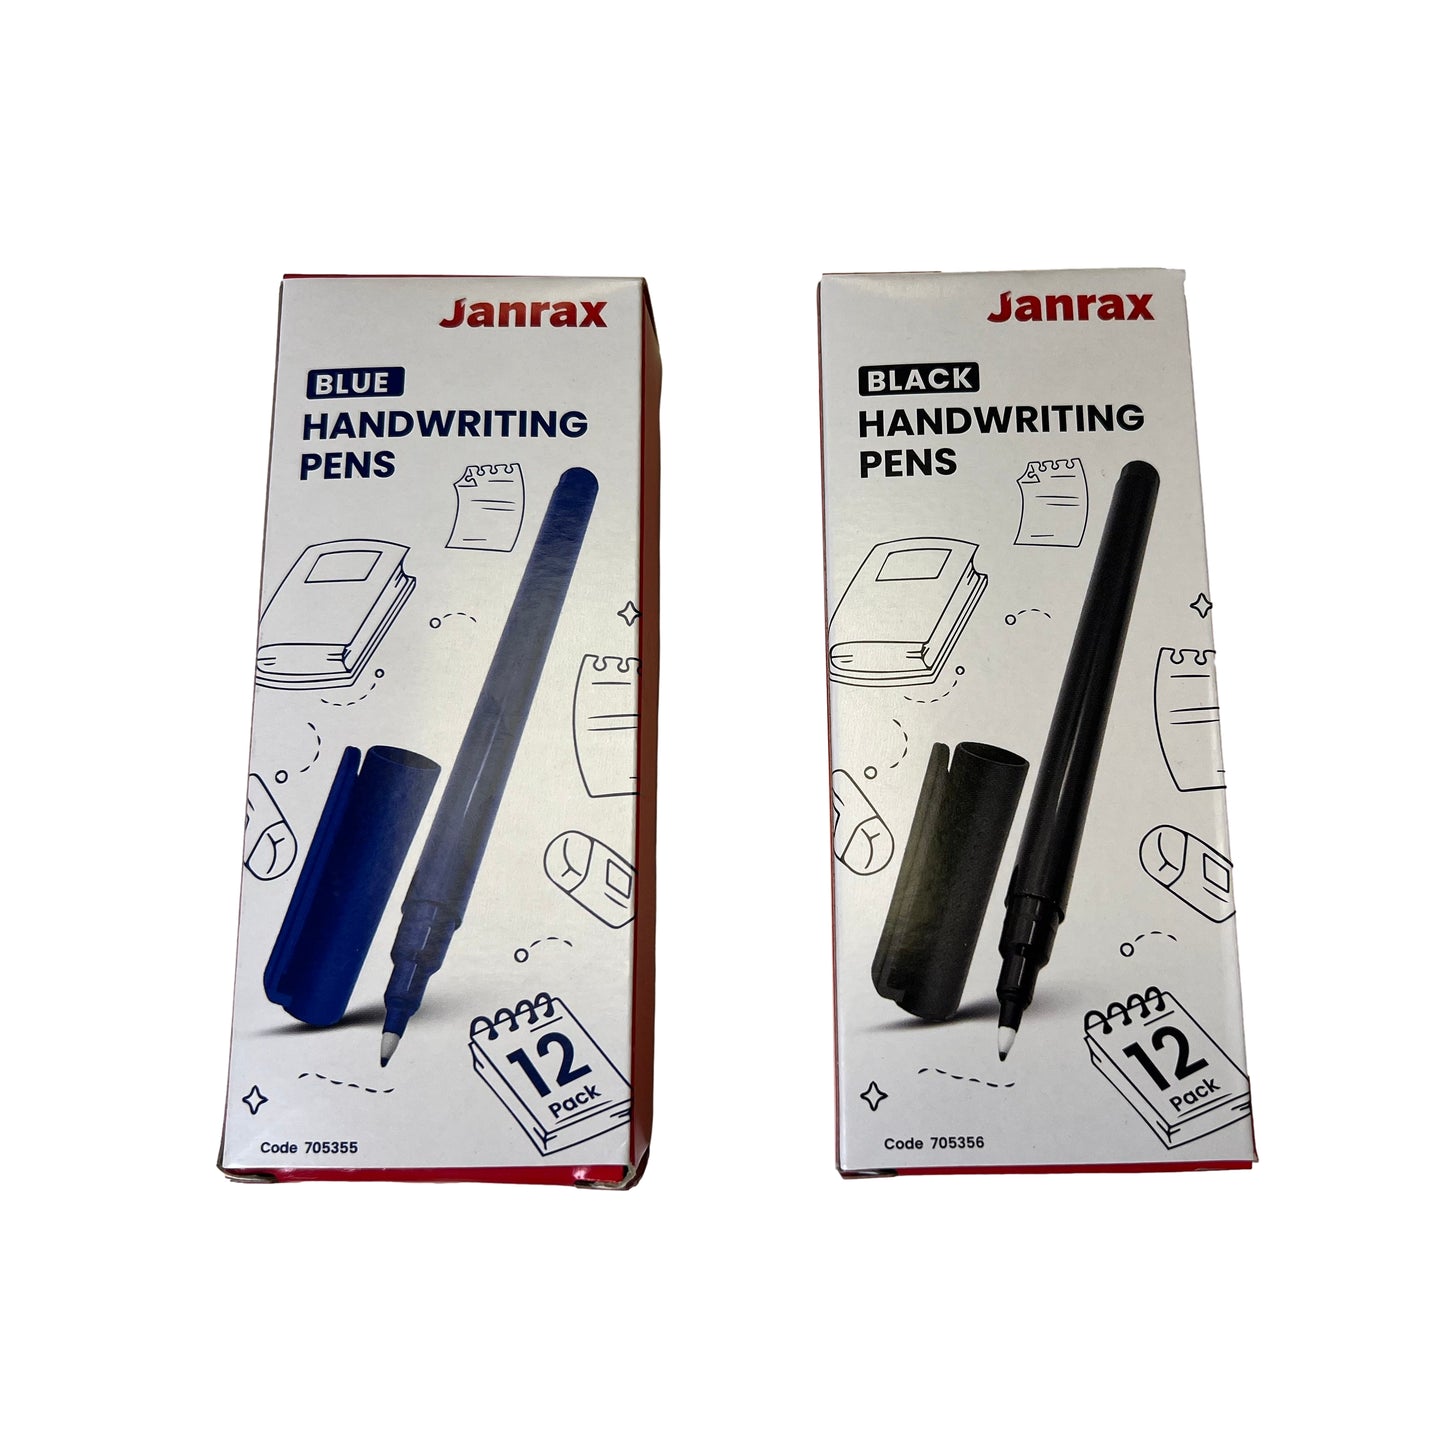 Pack of 12 Blue Handwriting Pens by Janrax